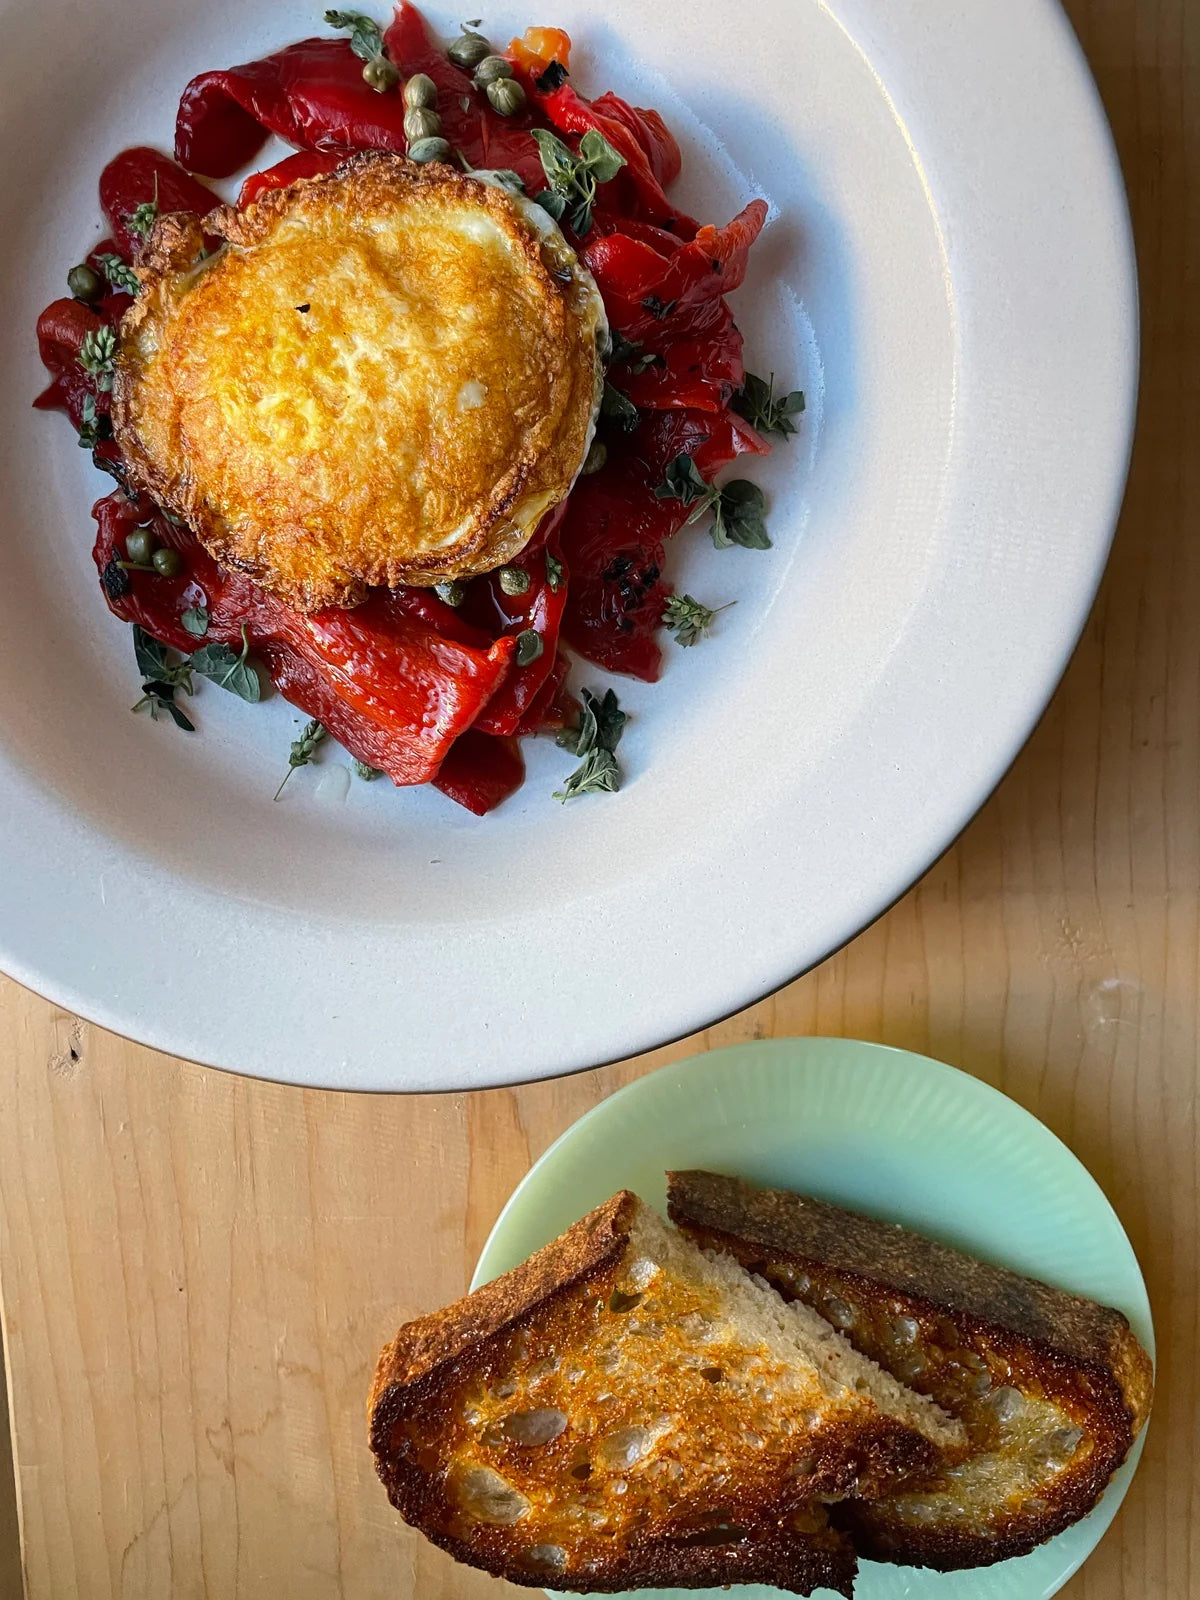 Marjory Bear’s Roasted Sweet Peppers with a Crispy 'Egg Spoon' Egg & Toast